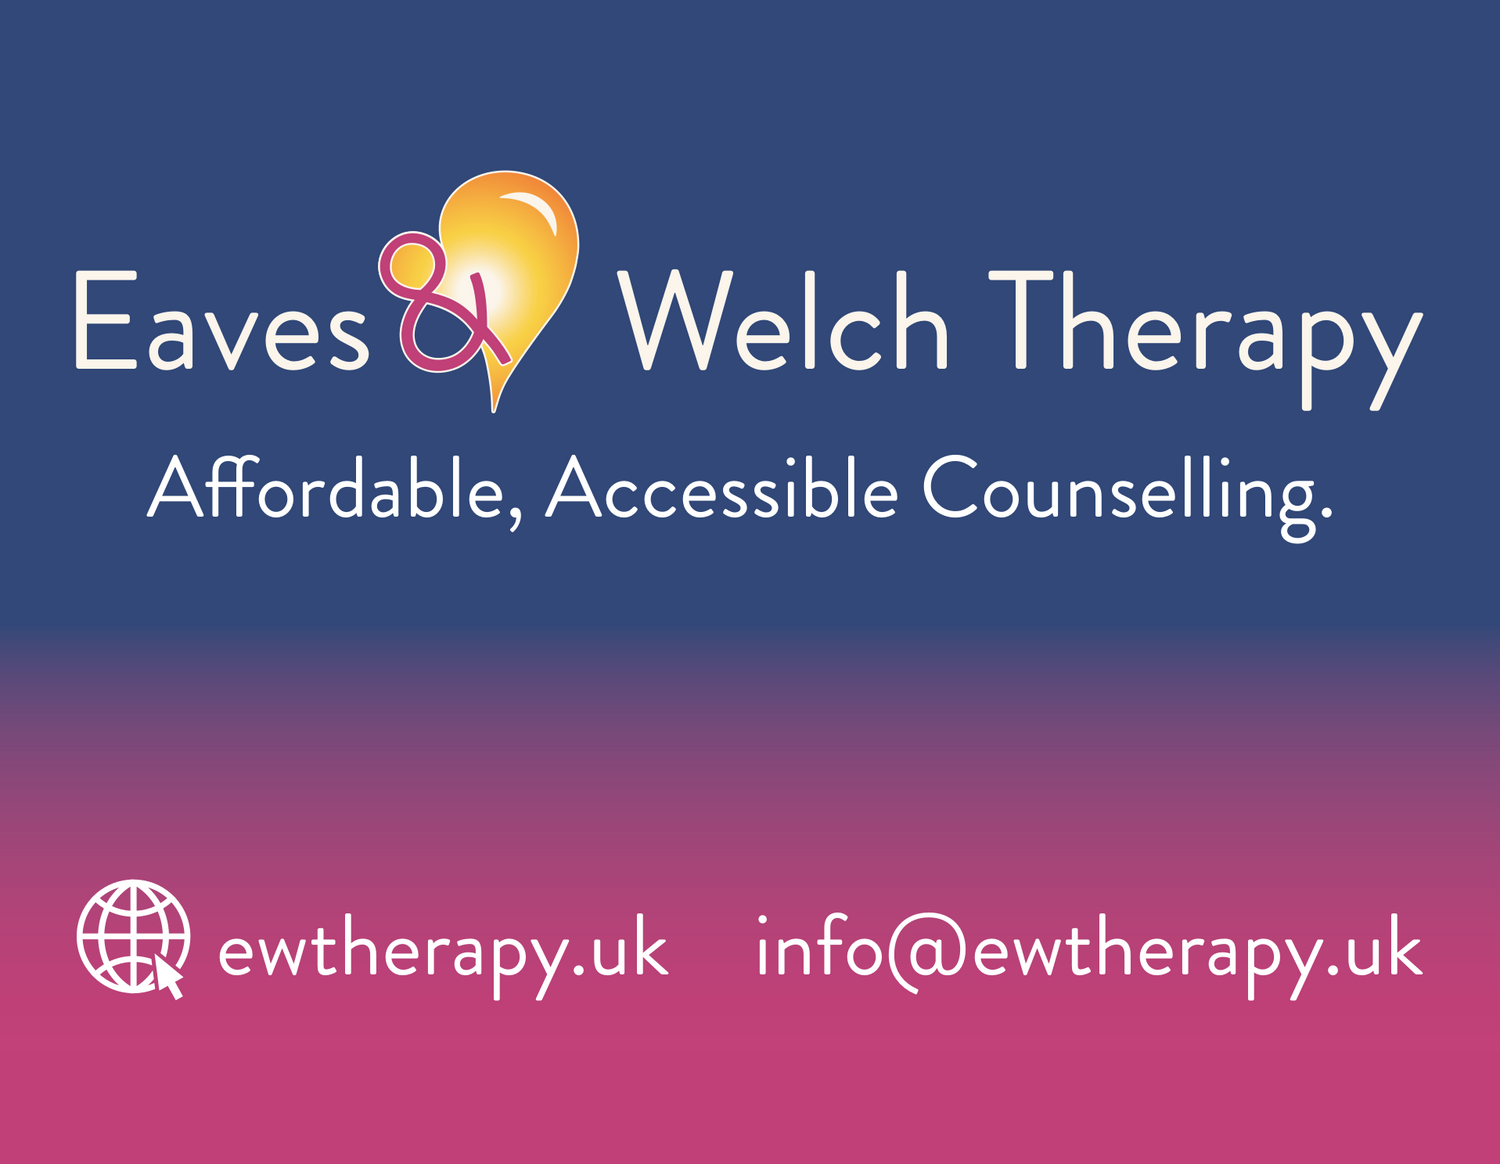 Gallery Photo of Visit ewtherapy.uk for more information and to book a free consultation